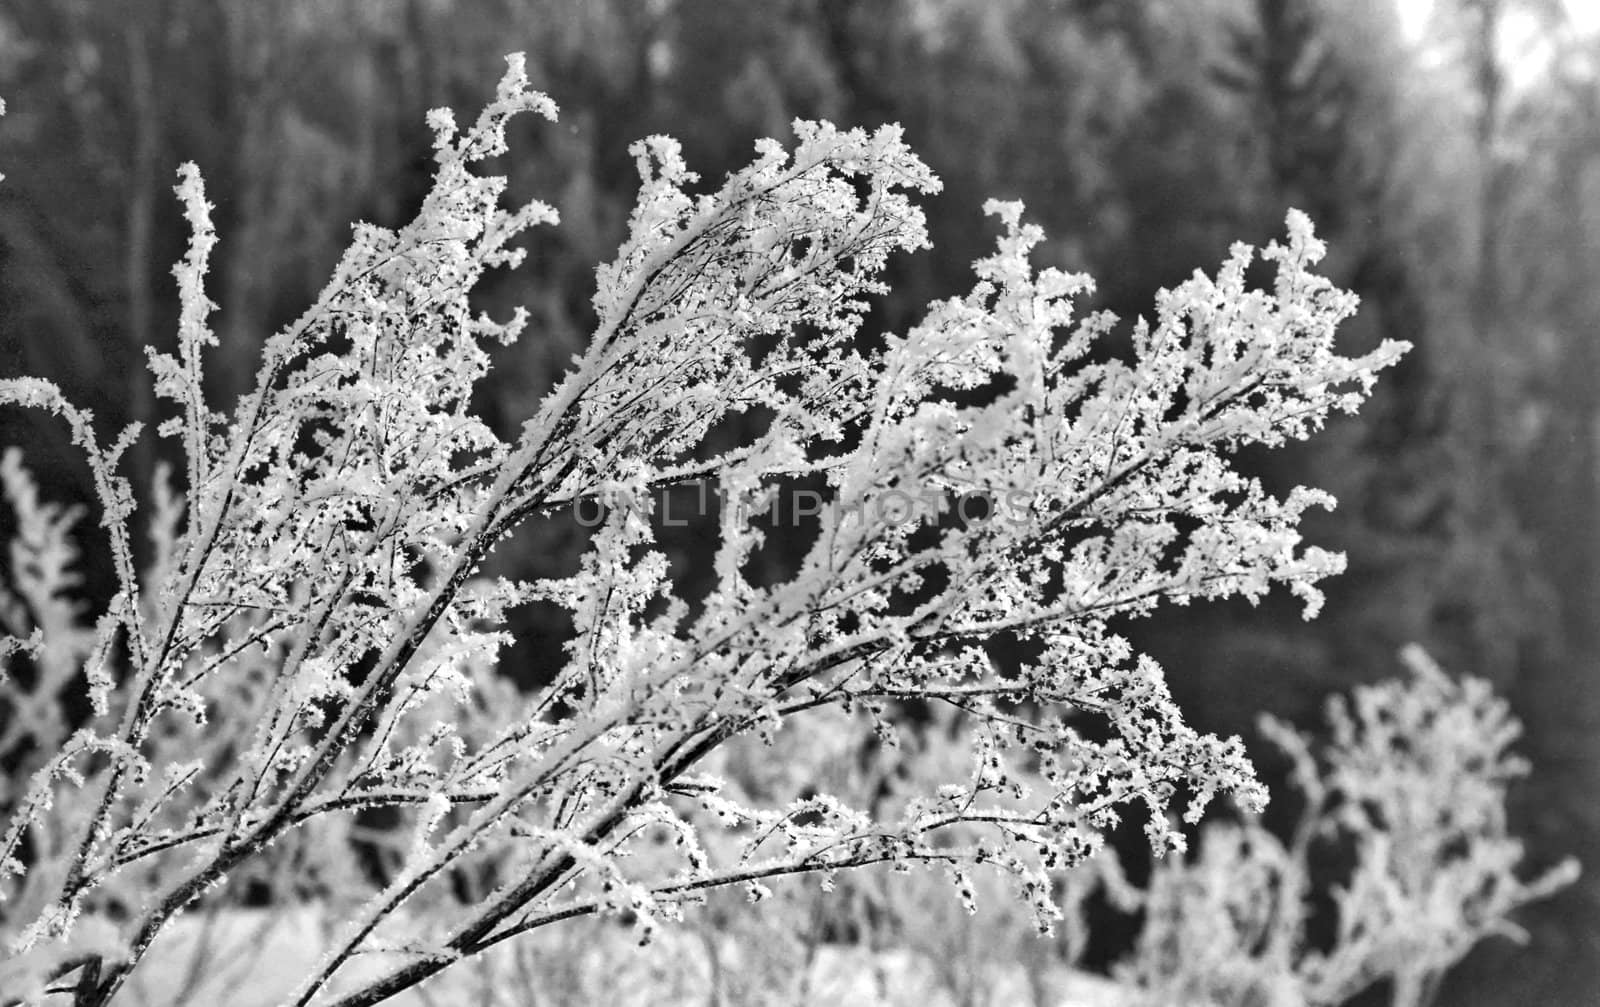 Ised grass on the forest background monochrome